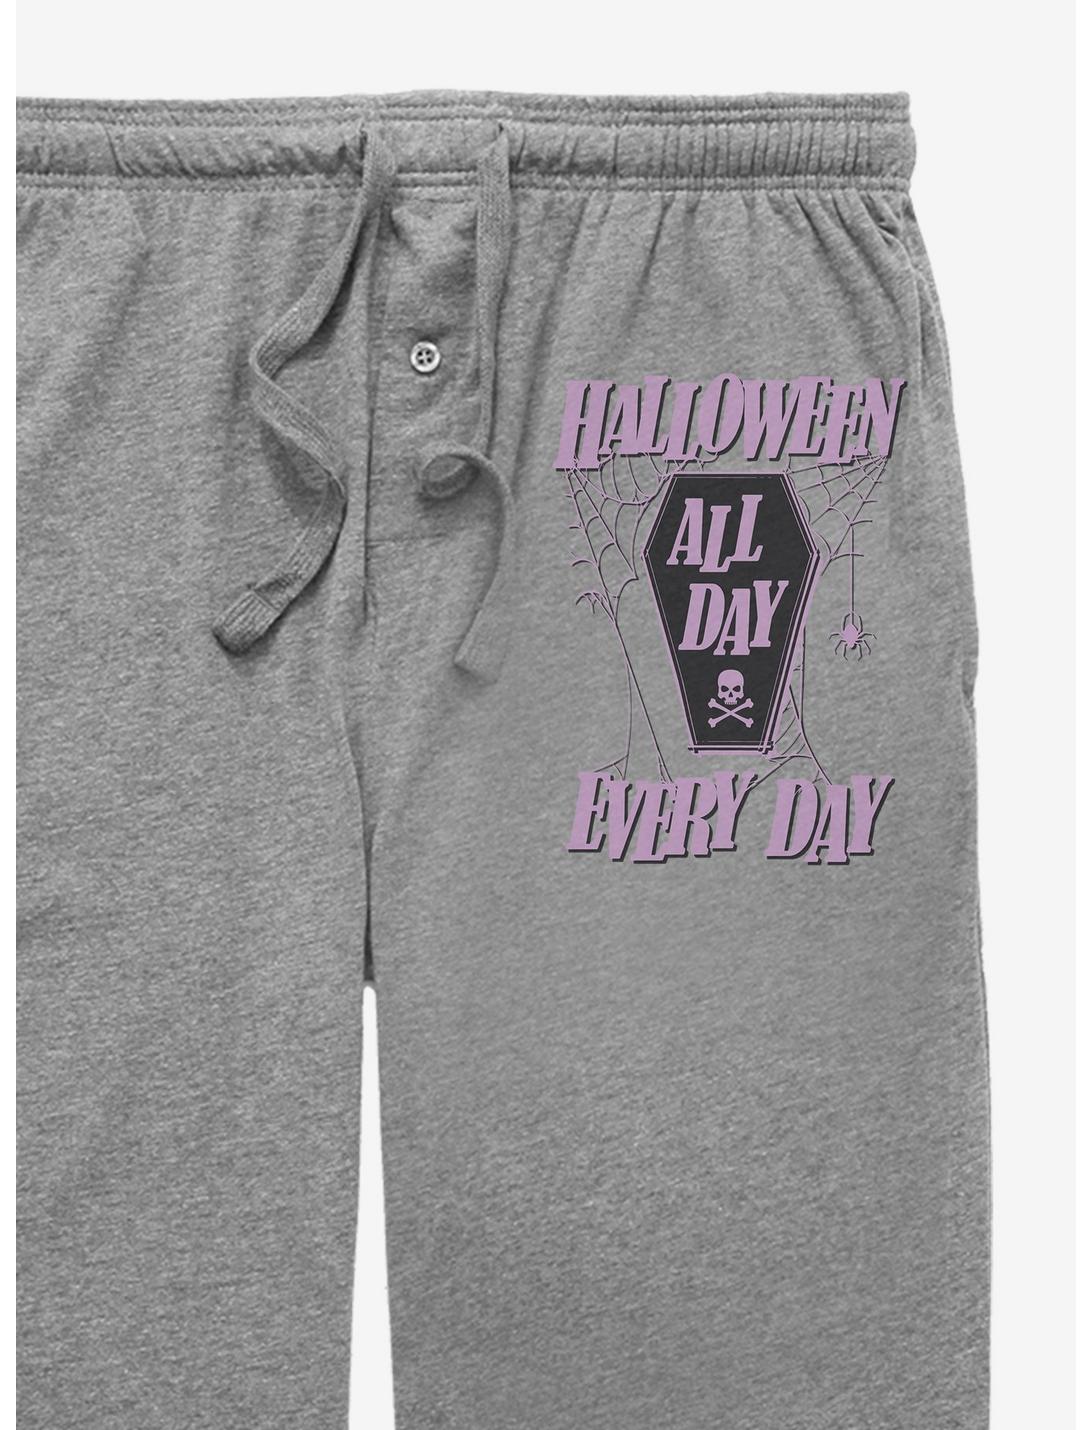 Halloween All Day Every Day Pajama Pants, GRAPHITE HEATHER, hi-res